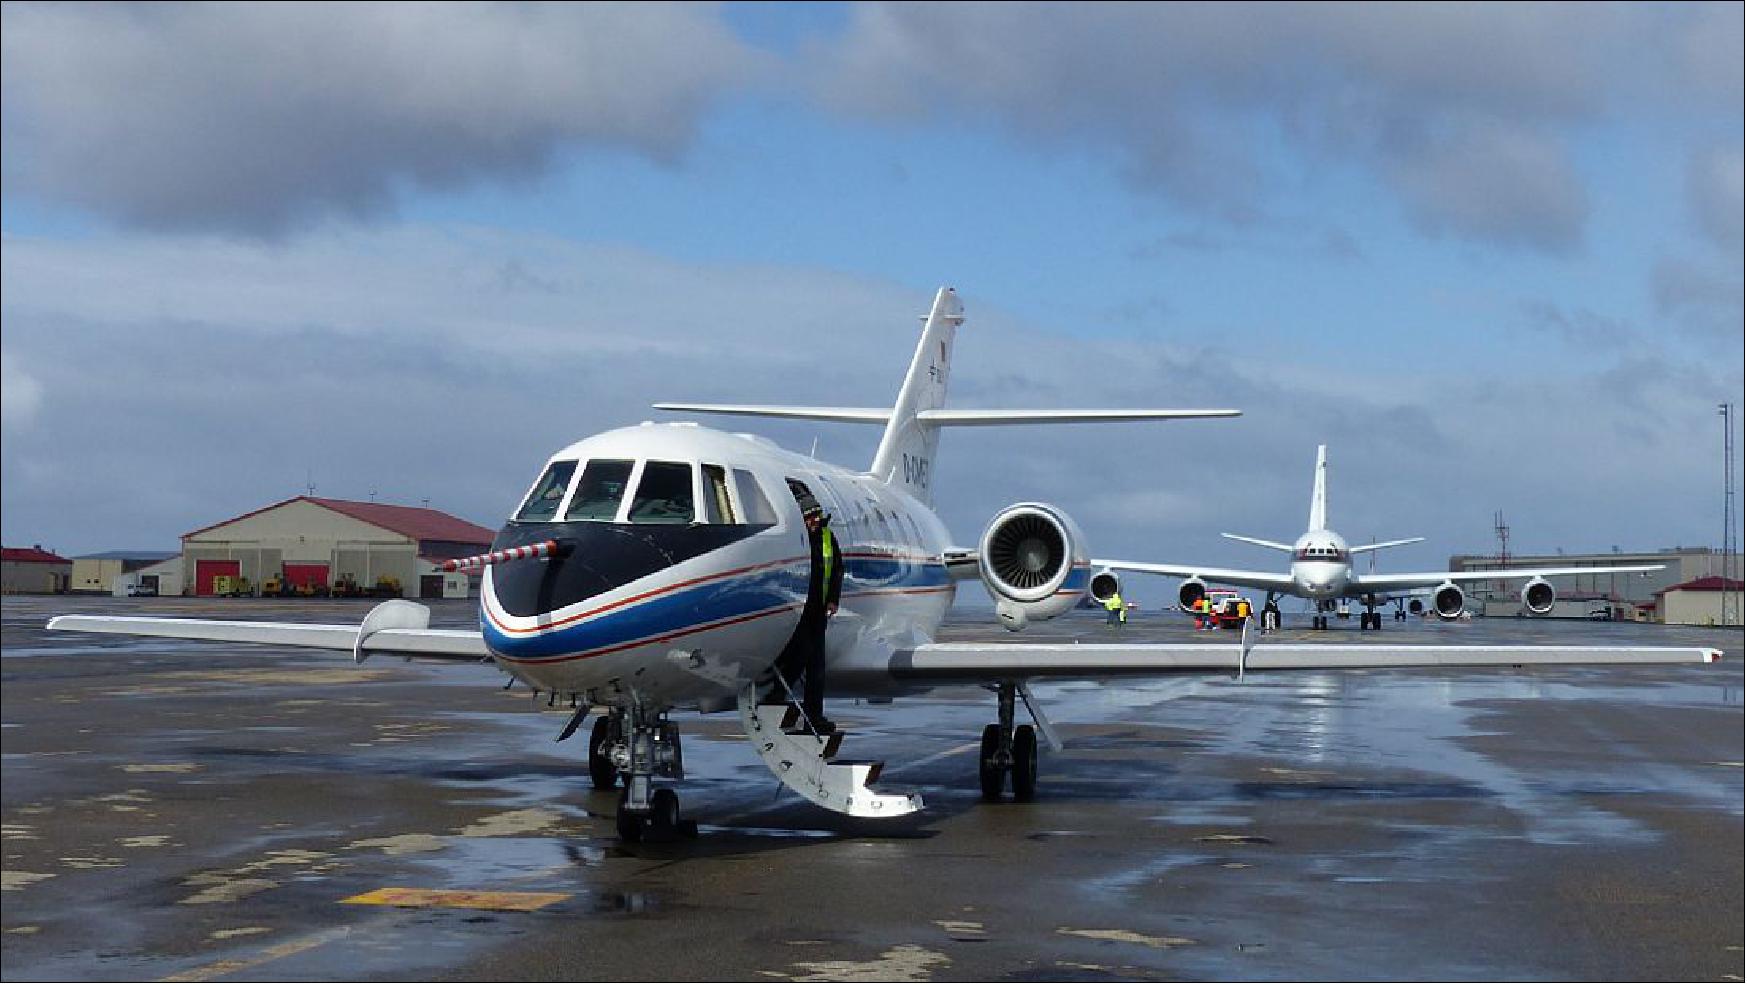 Figure 63: Photo of the DLR Falcon (foreground) and the NASA DC-8 aircraft prior to the joint research flight campaign from Iceland (image credit: DLR)